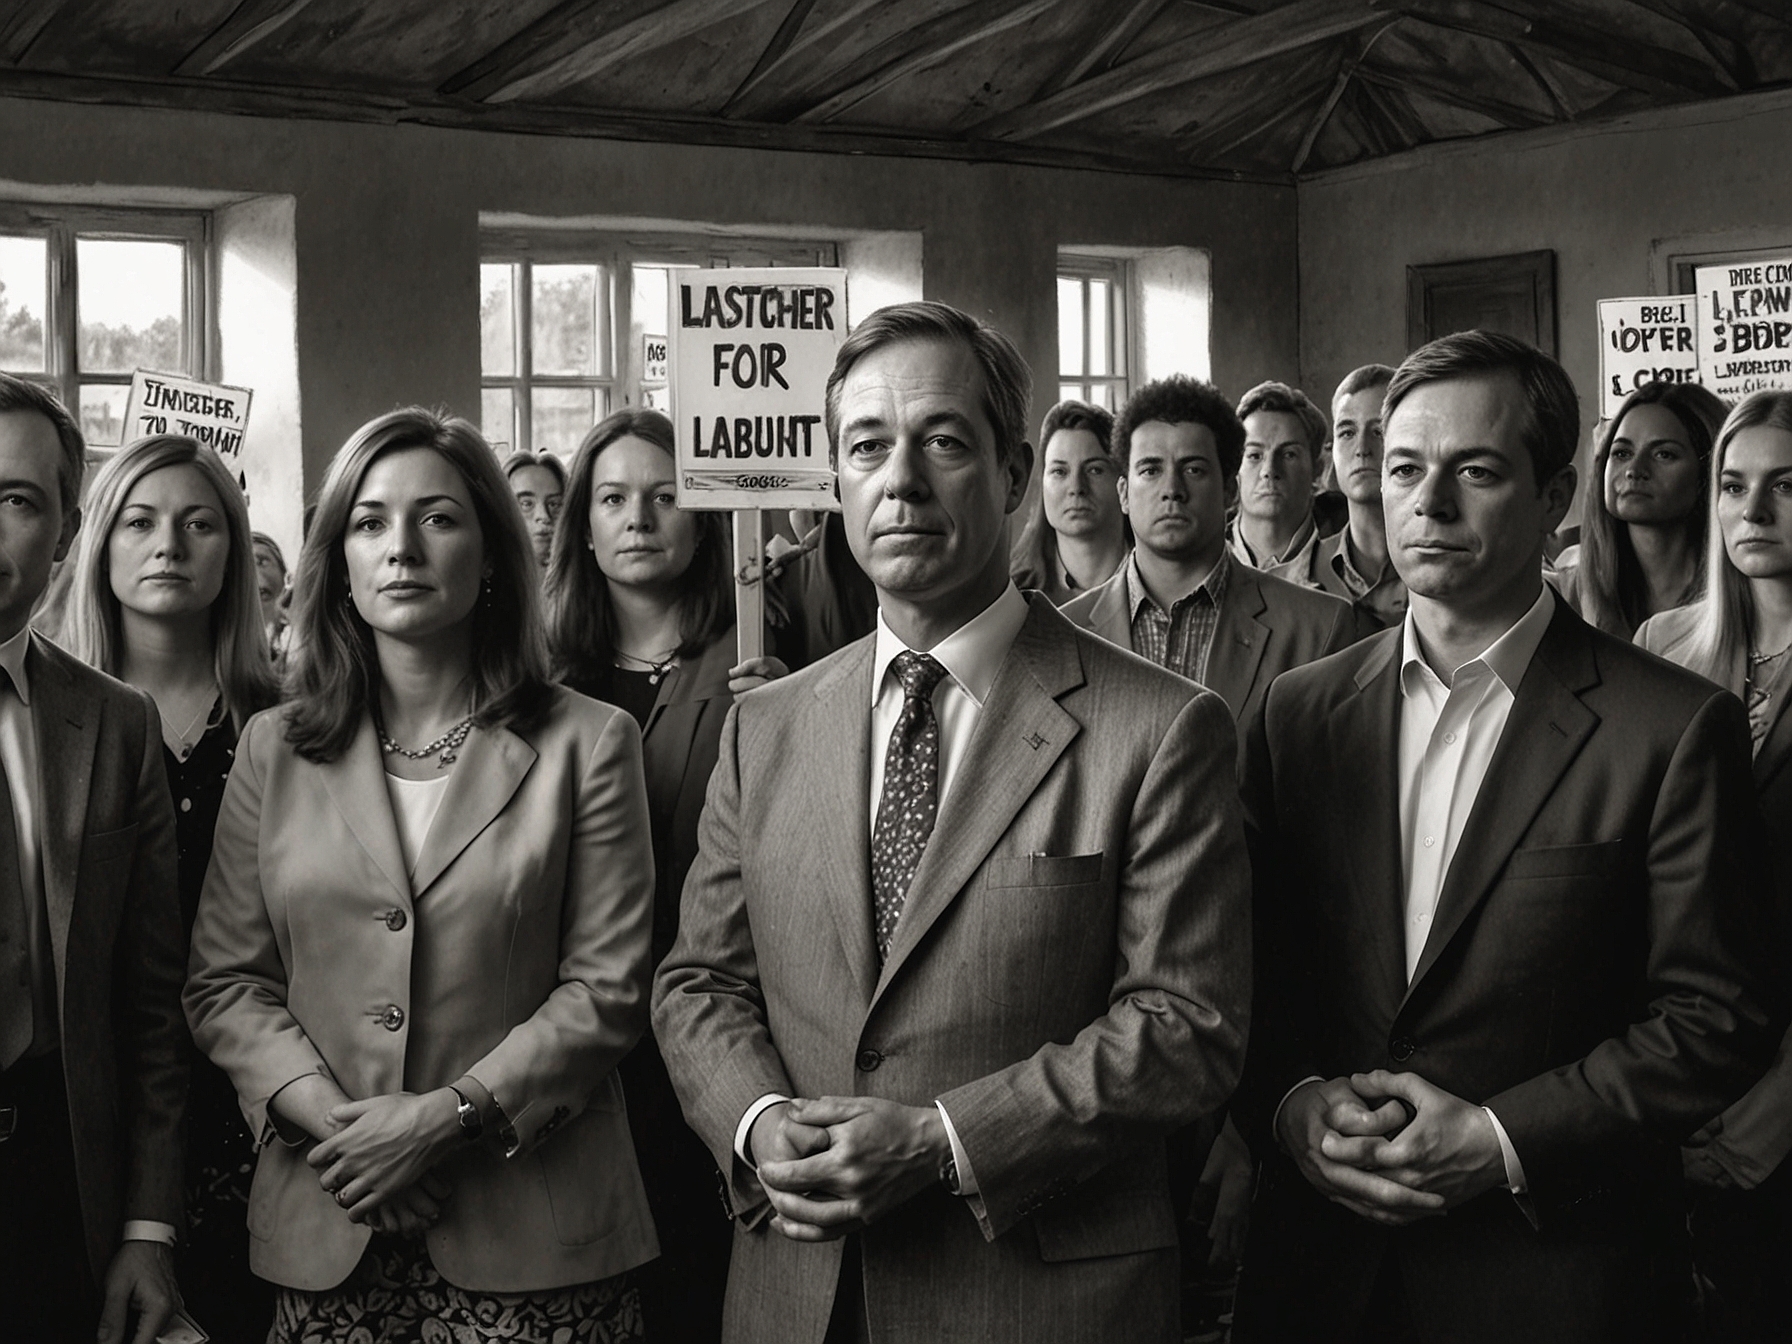 A diverse crowd of attendees at a community event, listening intently to Nigel Farage, with some holding signs that read 'Stronger Together' and 'New Hope for Labour Heartlands'.